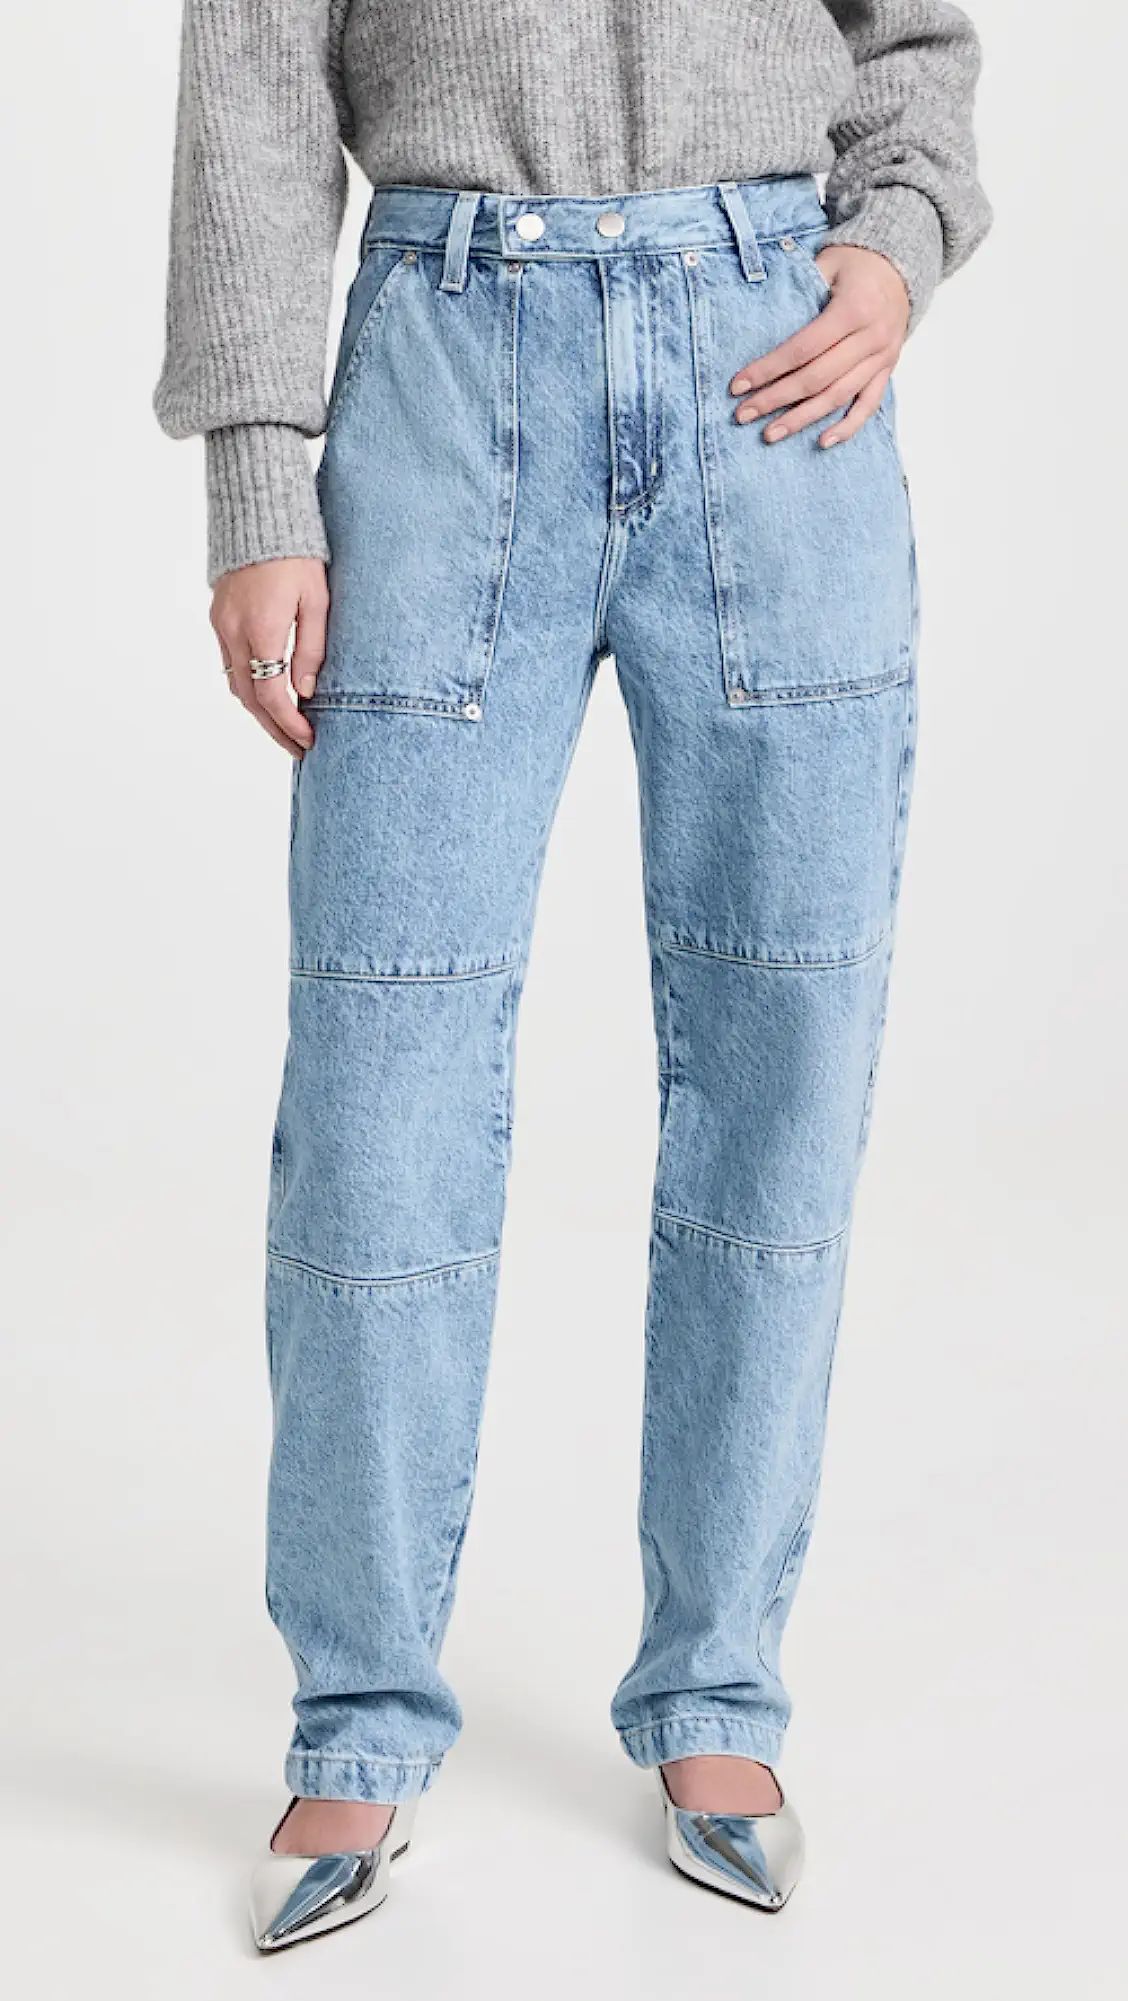 Clove Workwear Relaxed Straight Jeans | Shopbop